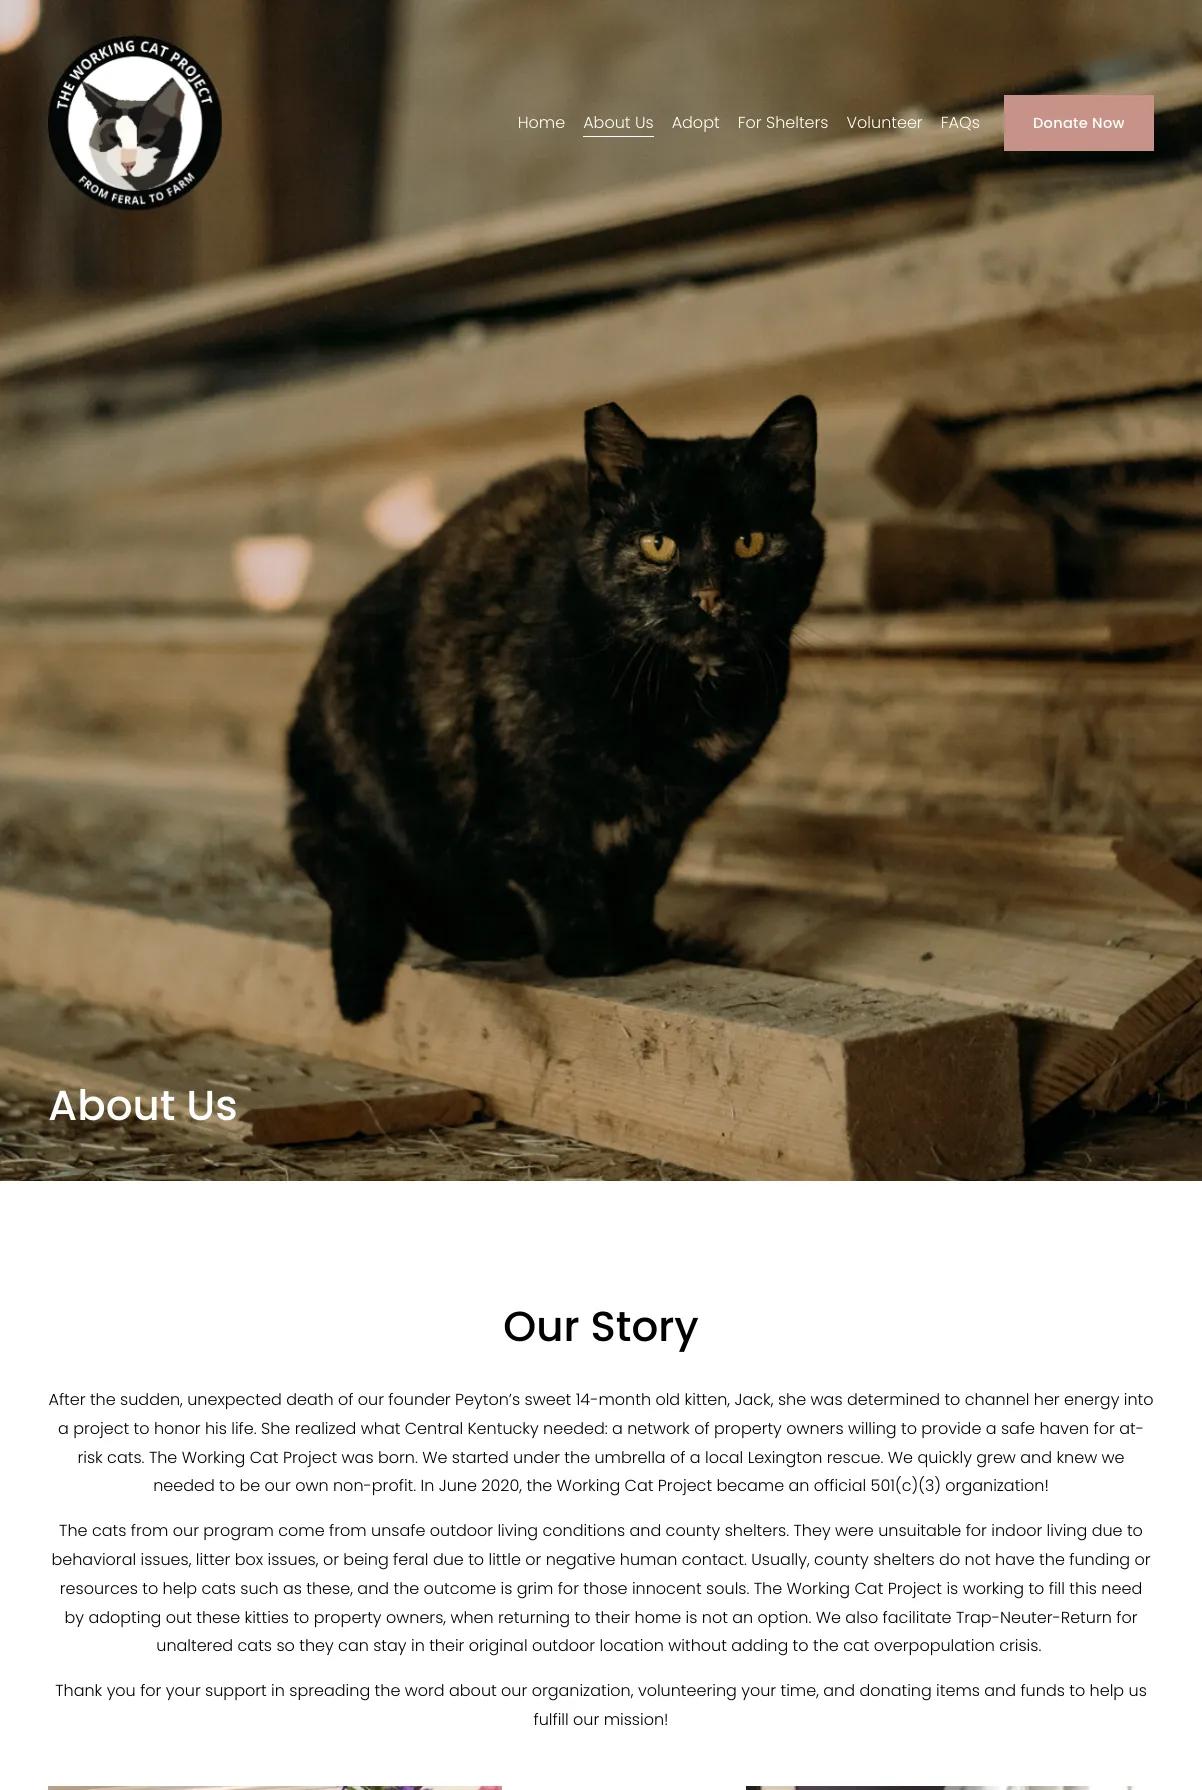 Screenshot 2 of The Working Cat Project (Example Squarespace Nonprofit Website)